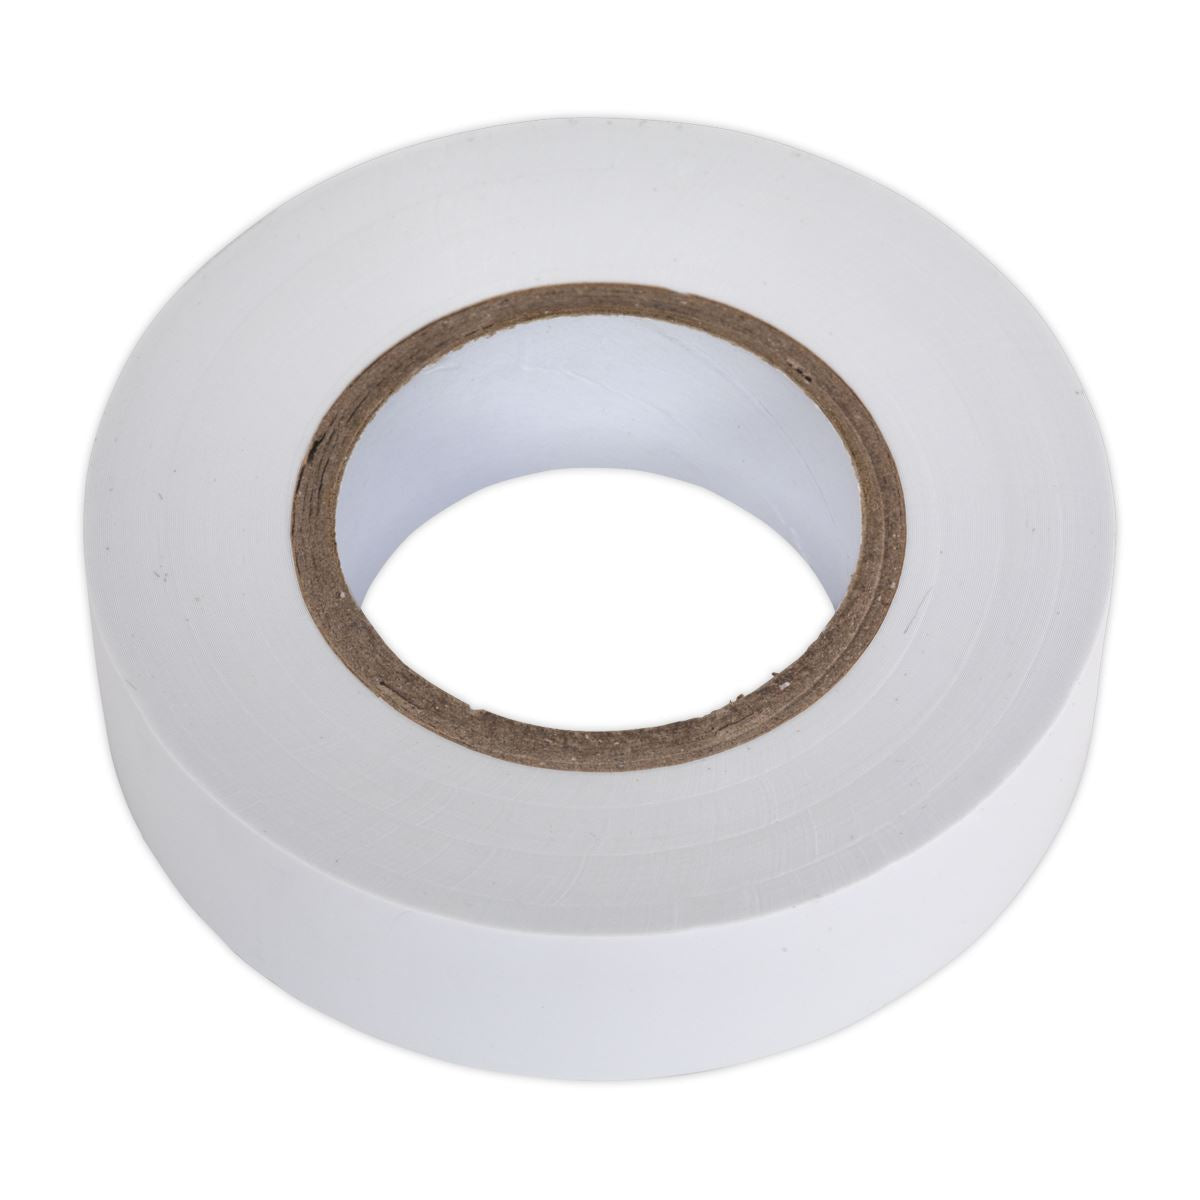 Sealey PVC Insulating Tape 19mm x 20m White Pack of 10